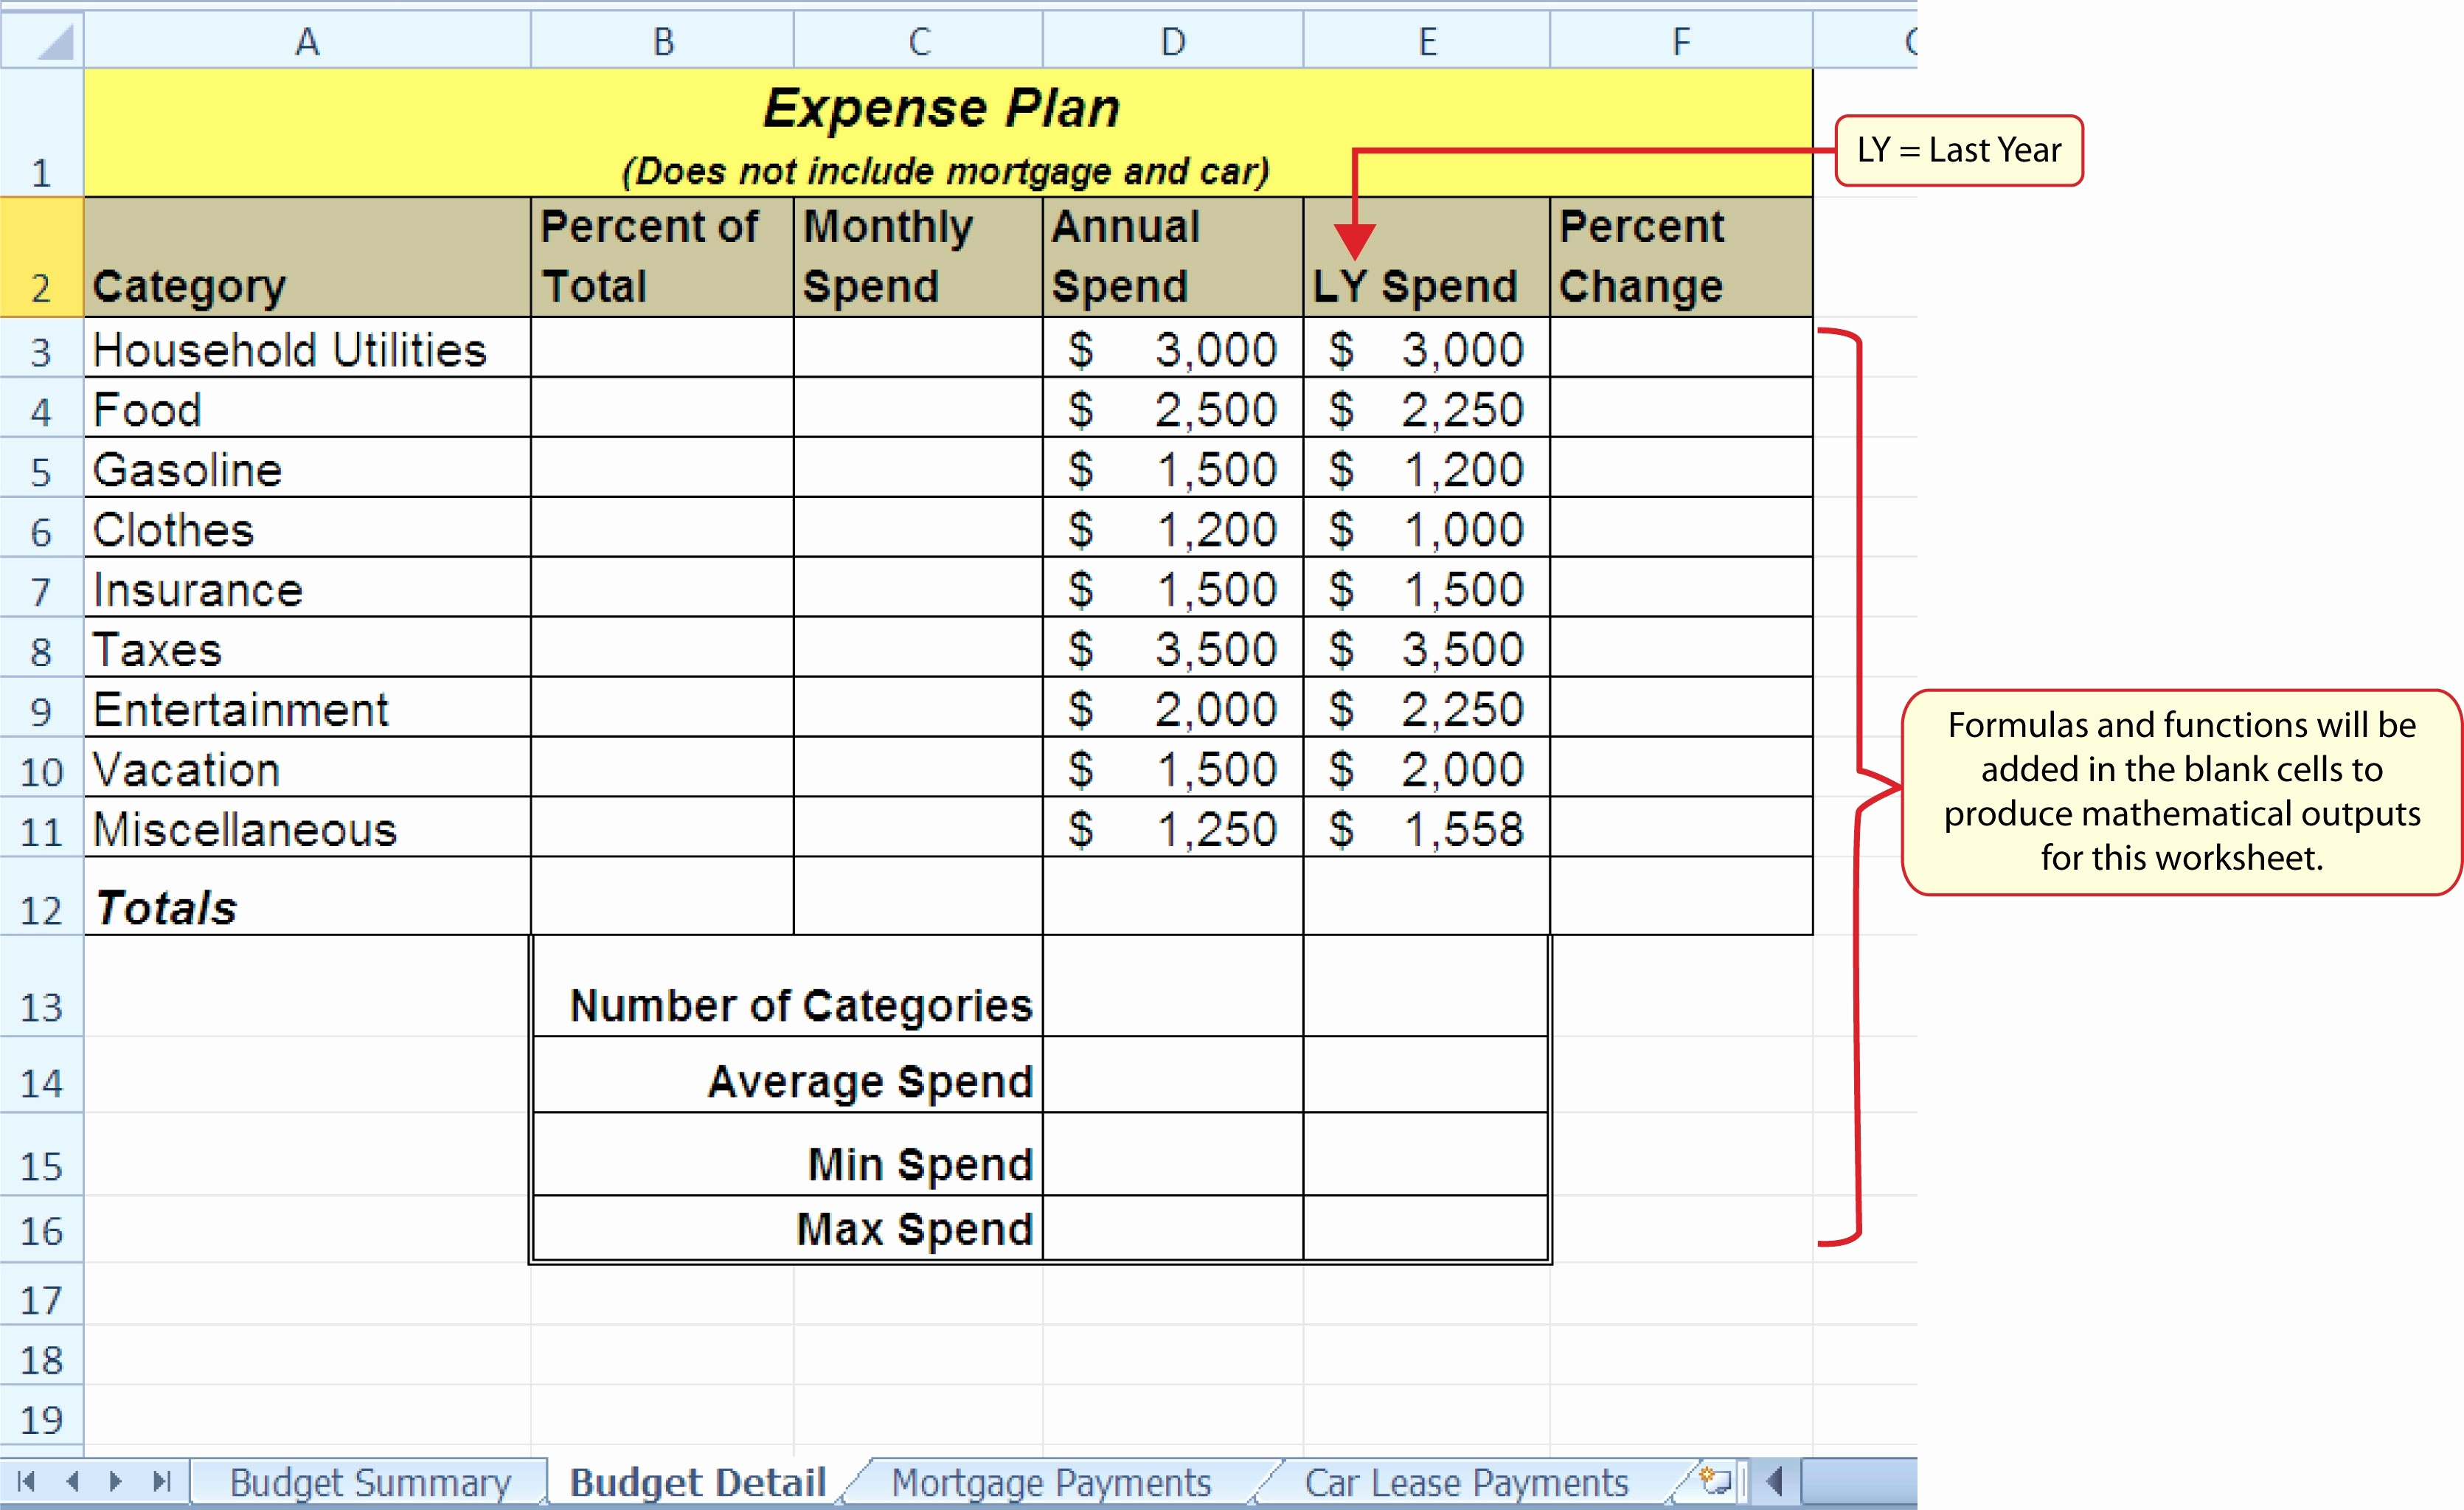 Microsoft Excel Spreadsheet Help Within Microsoft Excel Spreadsheet Instructions Unique Microsoft Excel